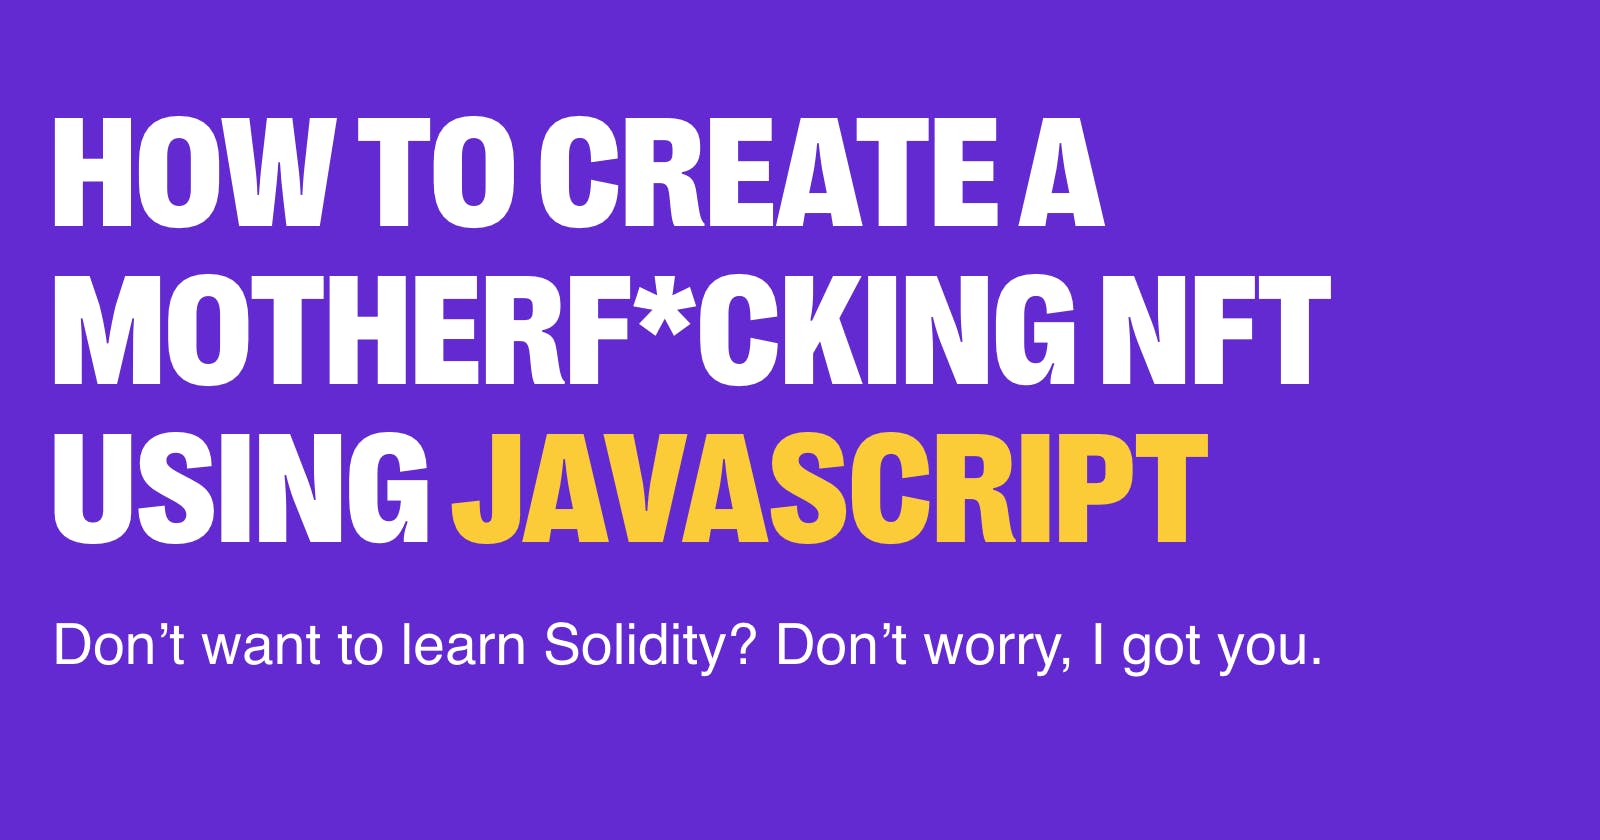 How to create a motherf*cking NFT using JavaScript